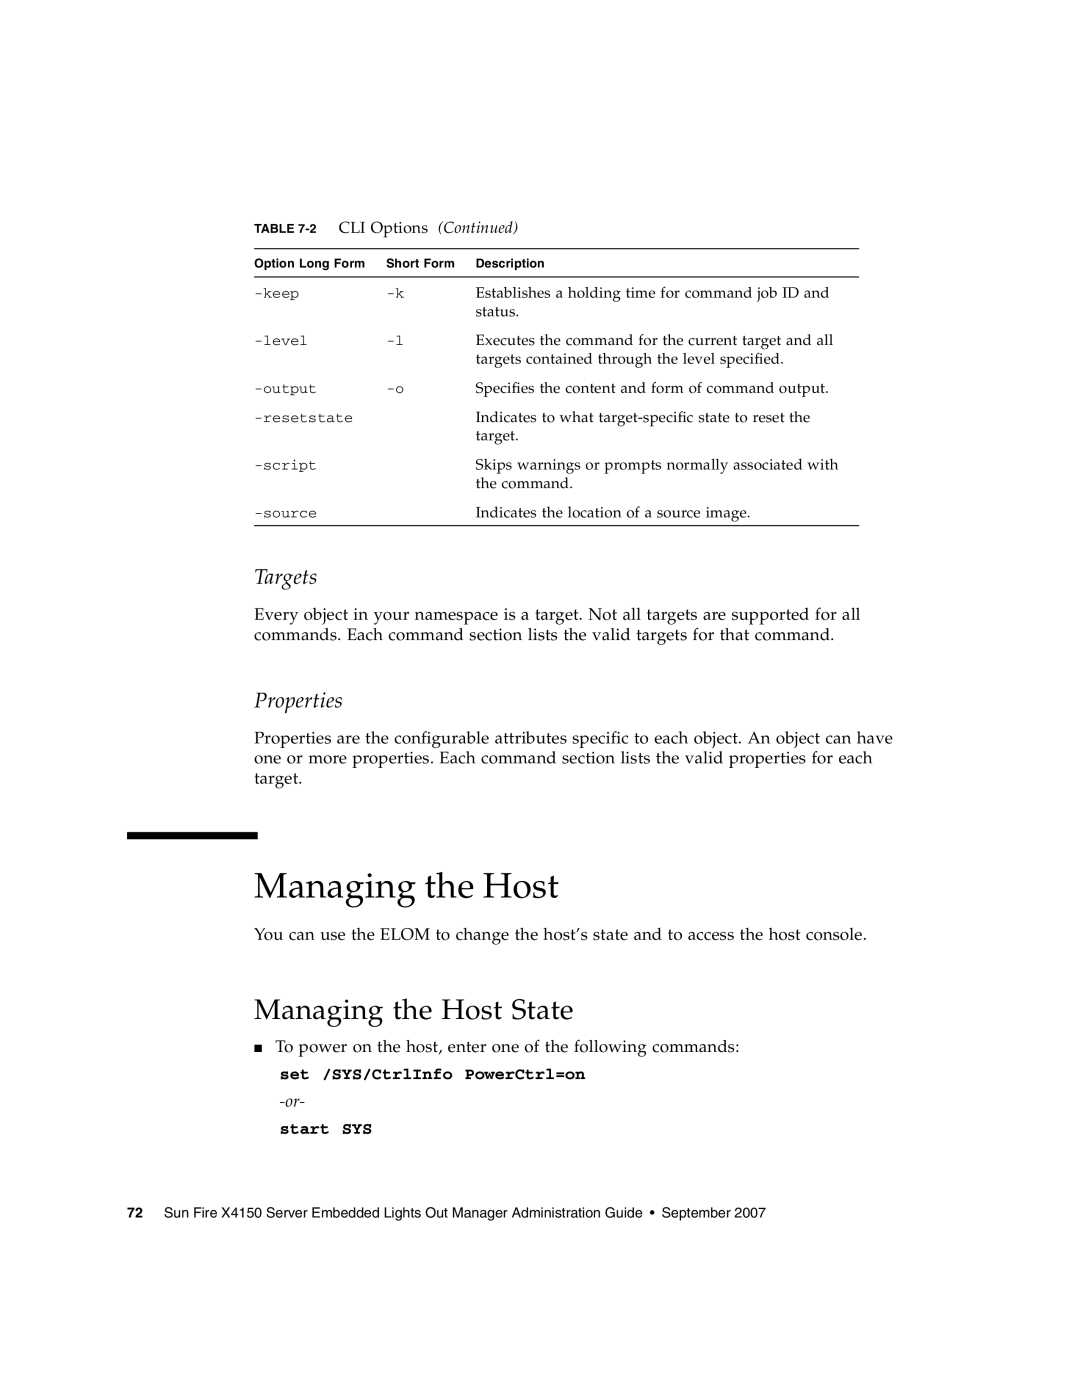 Sun Microsystems X4150 manual Managing the Host State, Targets, Properties, start SYS 